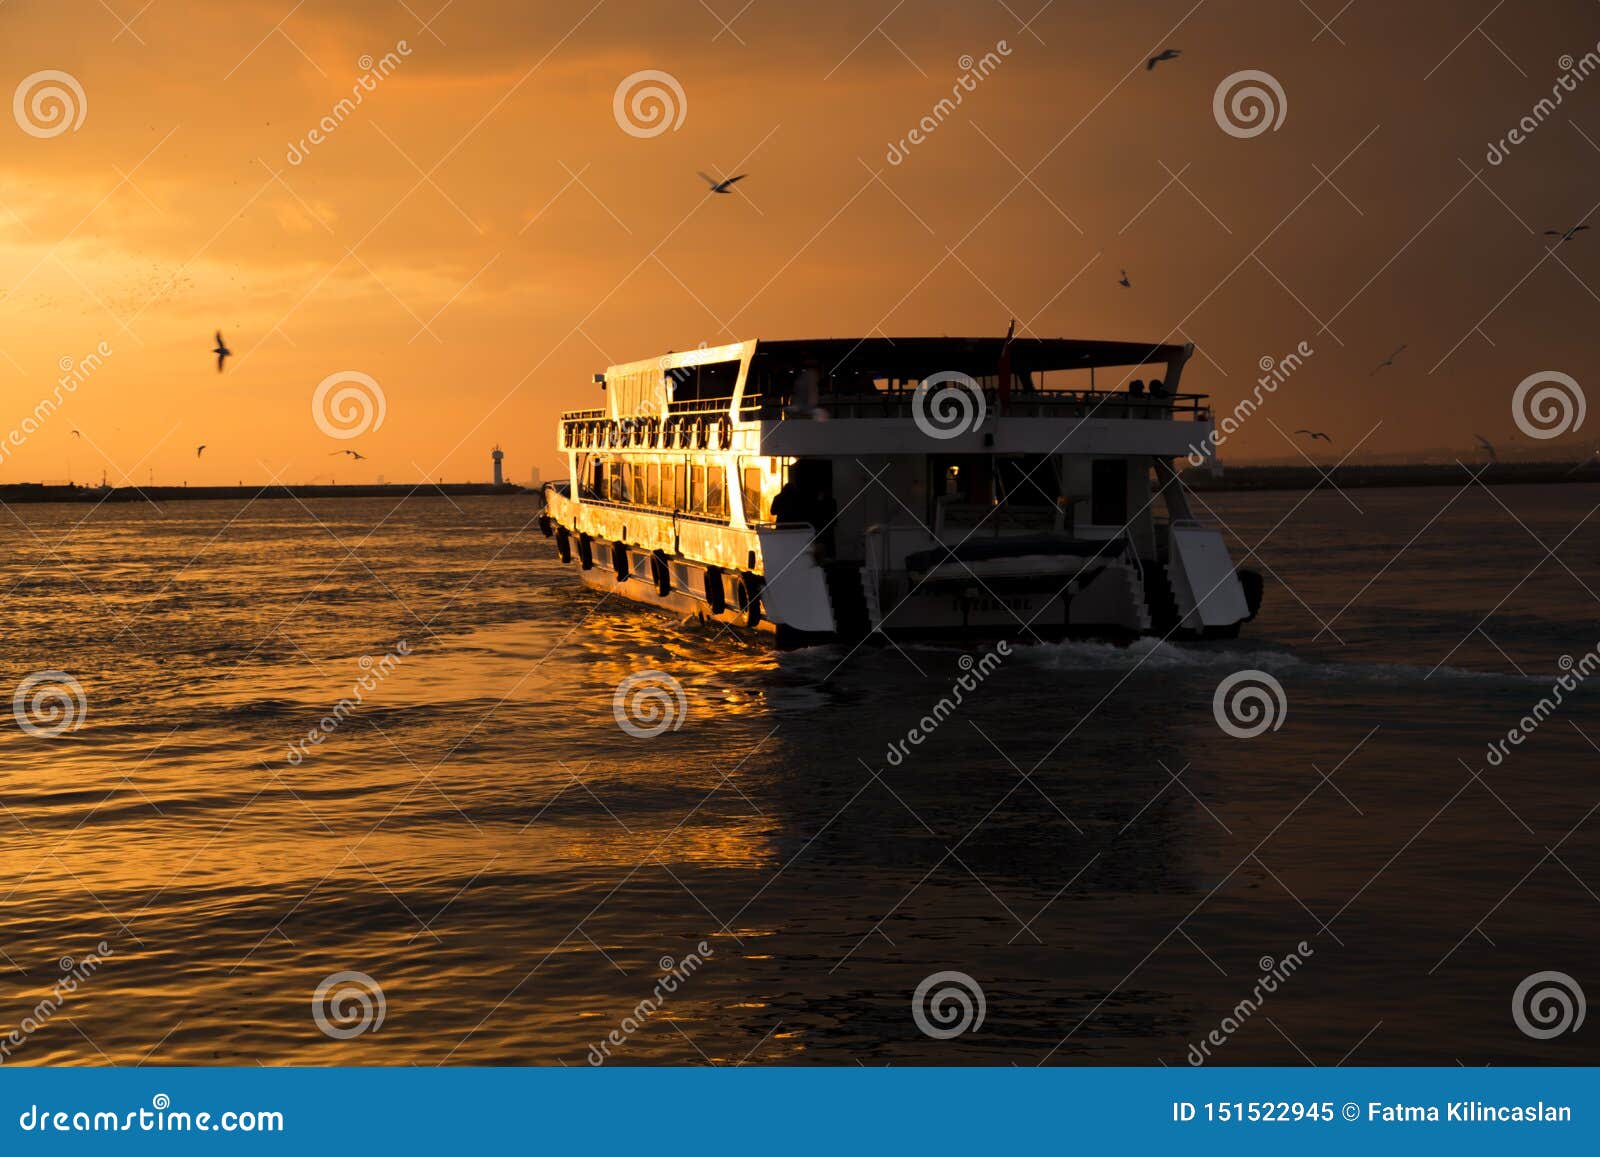 sunset and steamer